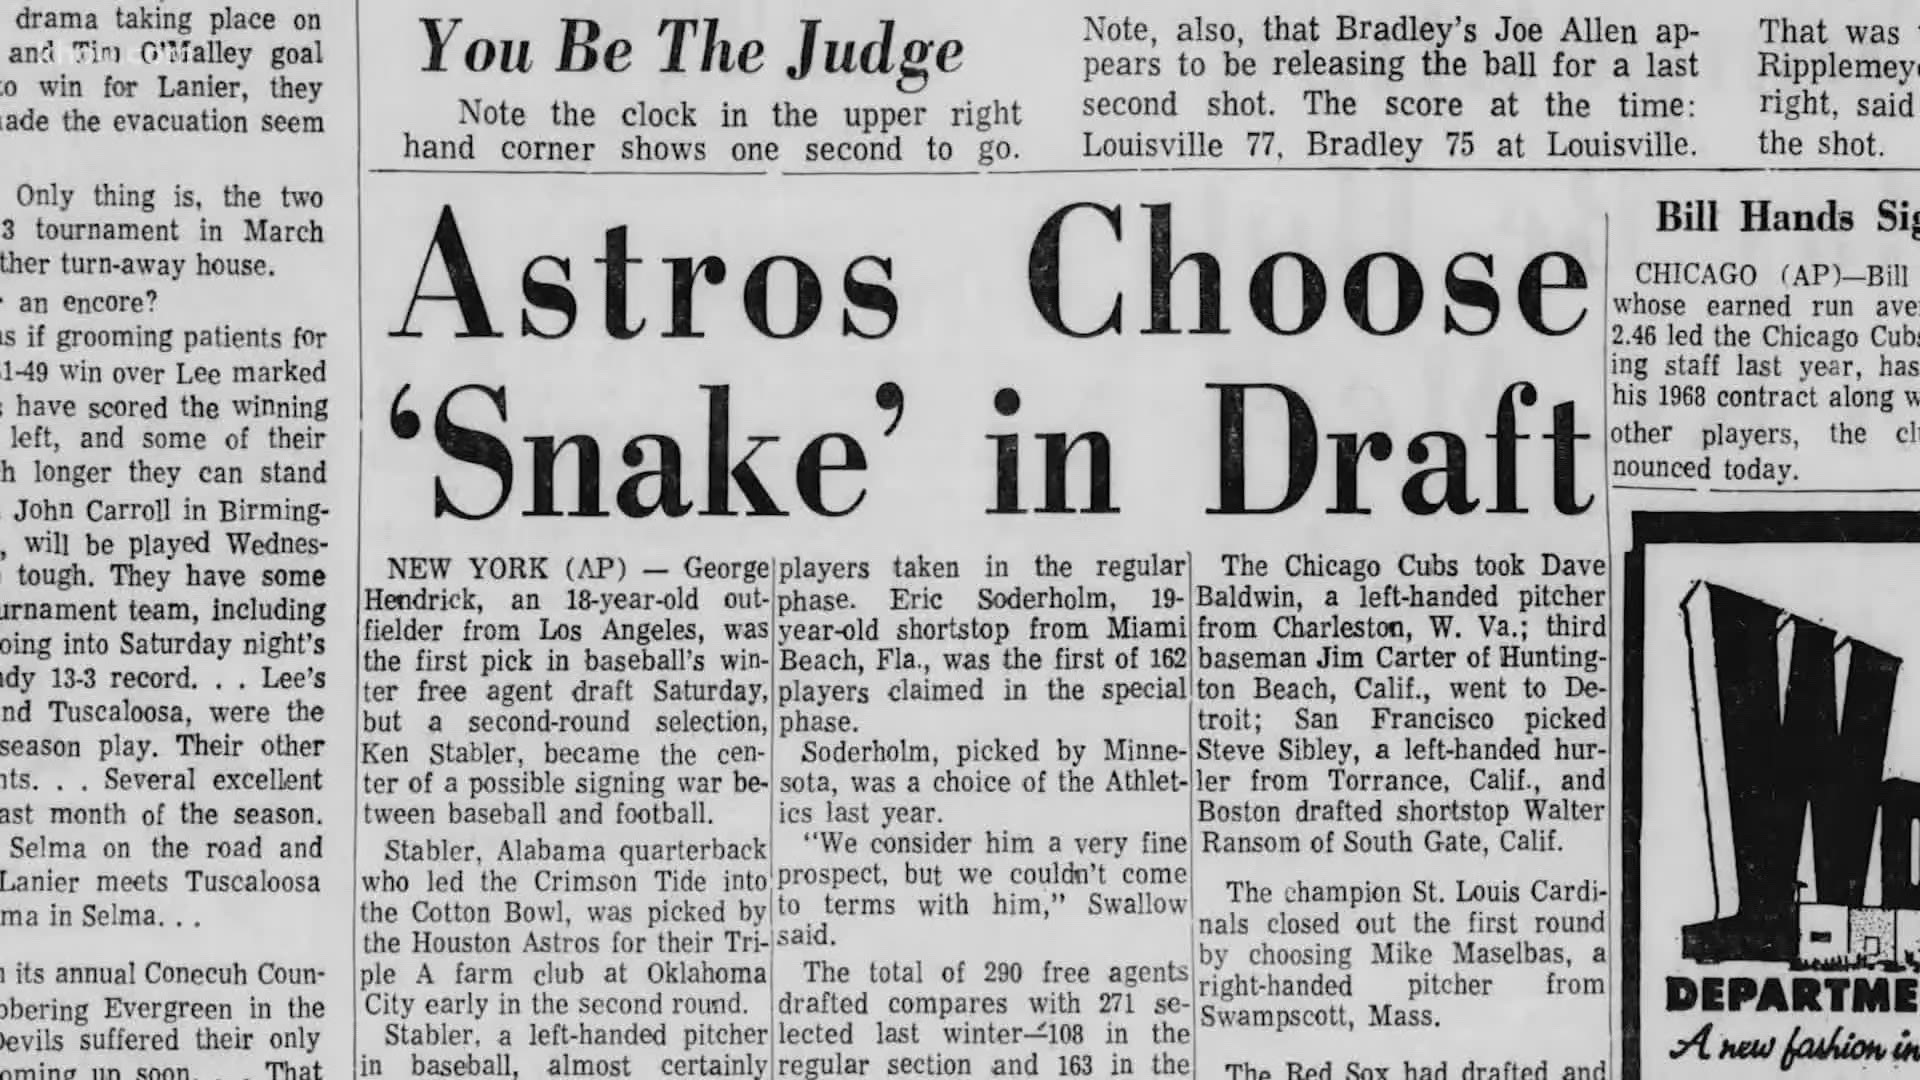 Ken "Snake" Stabler was best known for his performances on the football field, but the Astros took a stab at him in the MLB draft in 1968.